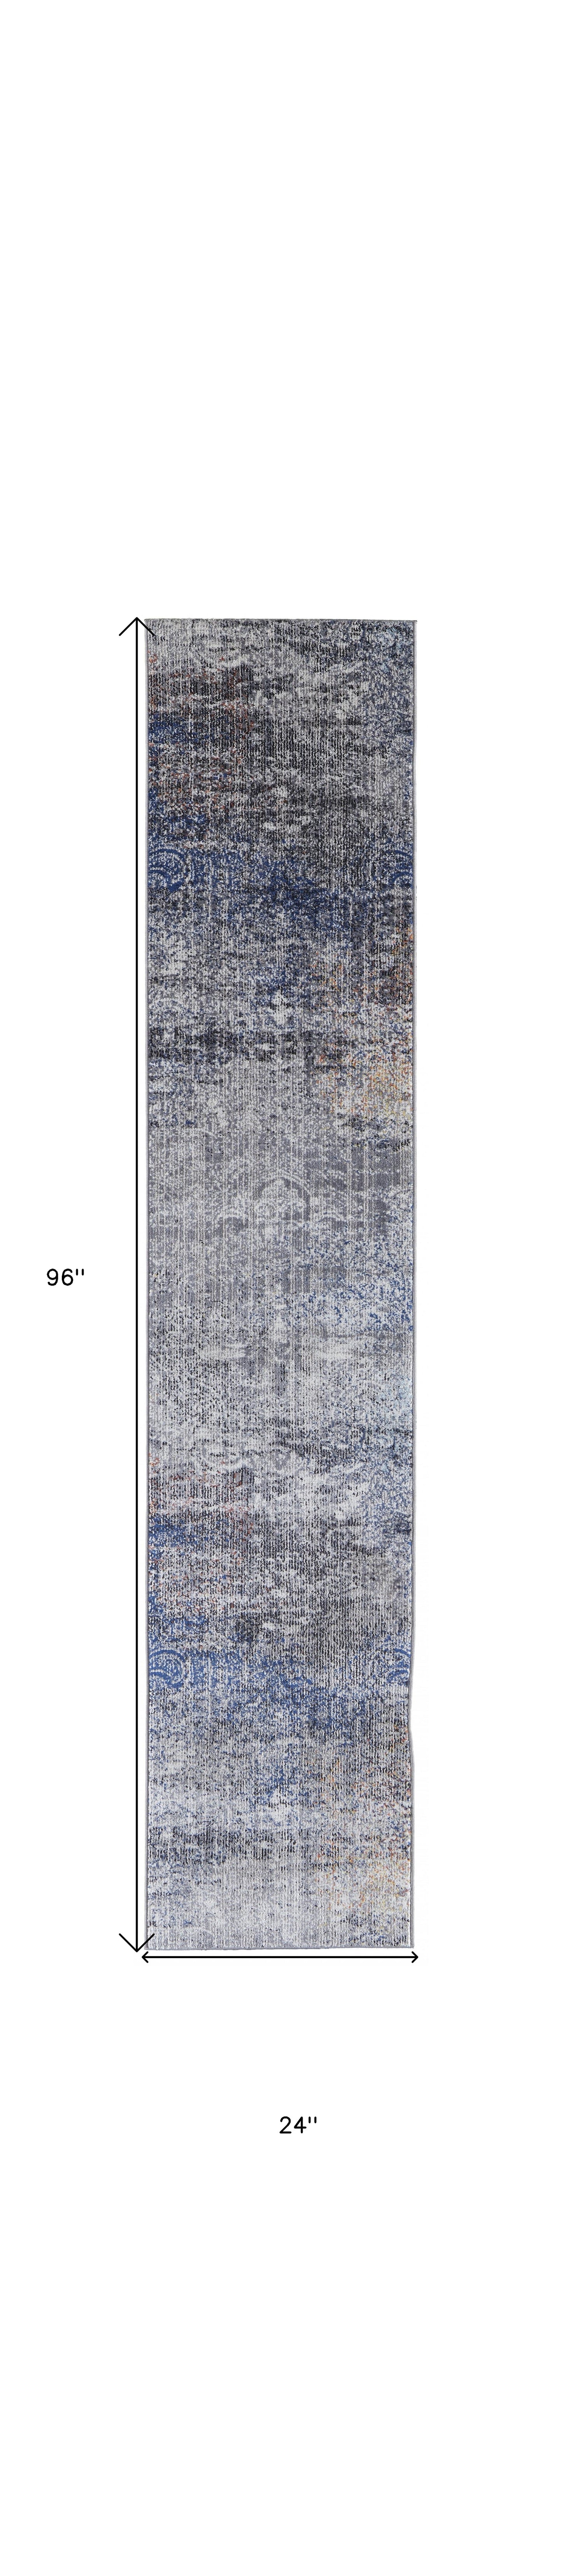 7' X 10' Taupe Blue And Ivory Abstract Power Loom Distressed Stain Resistant Area Rug